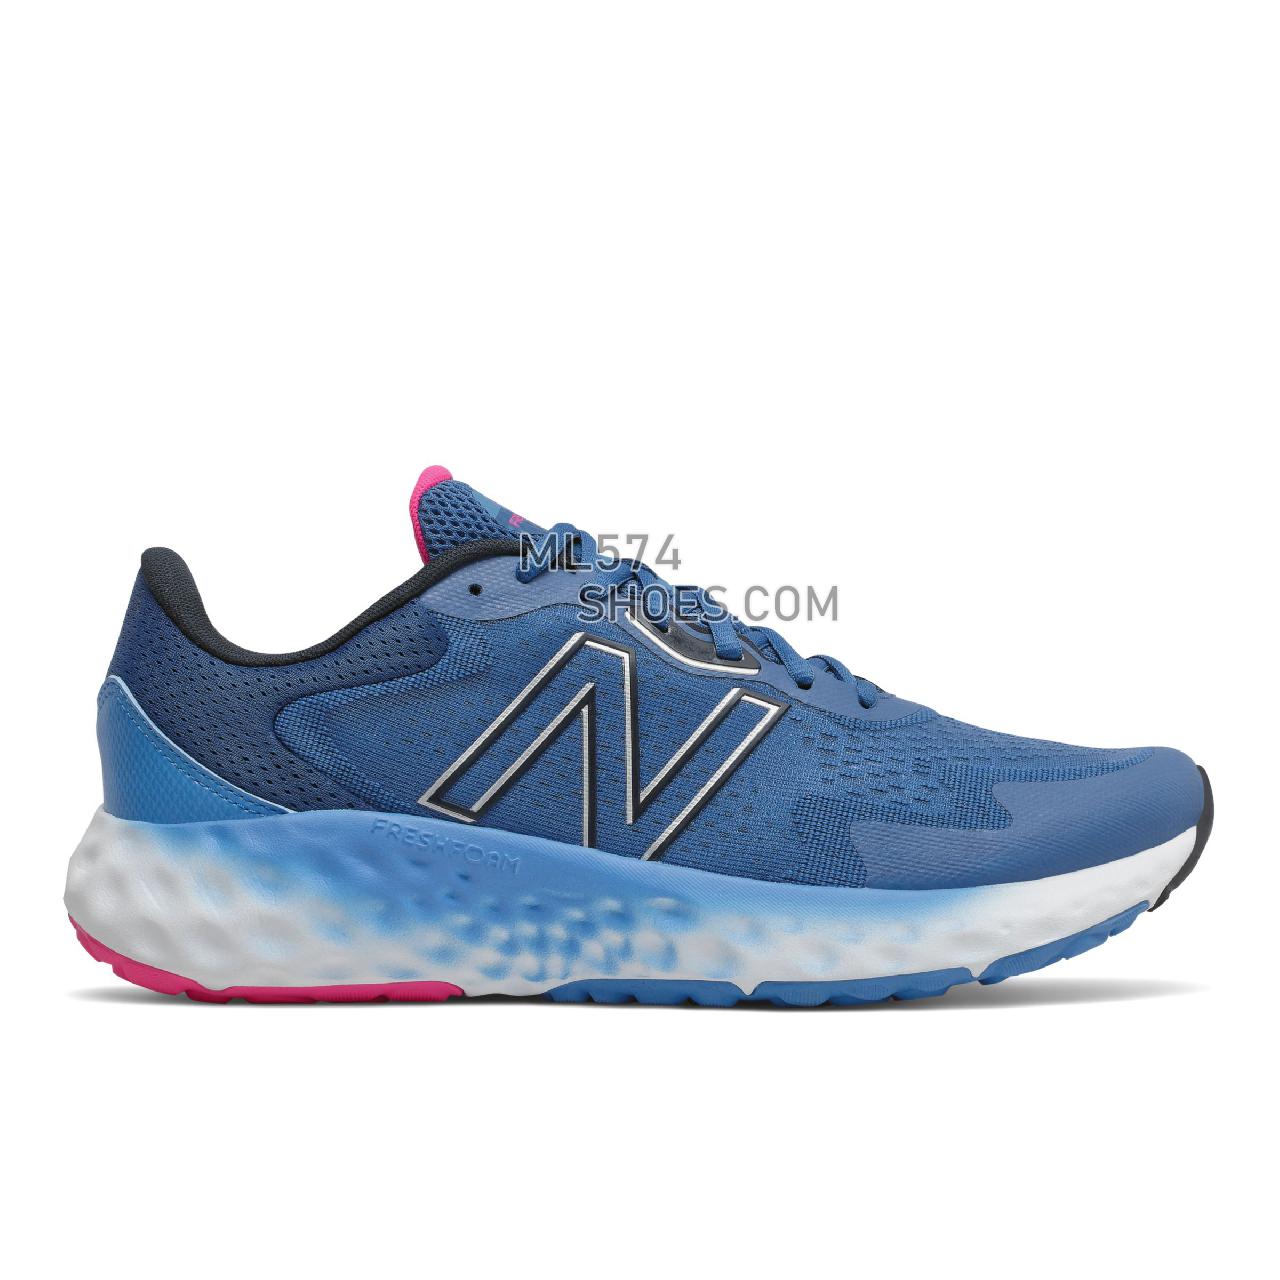 New Balance MEVOZV1 - Men's Classic Sneakers - Oxygen Blue with Pink - MEVOZCB1